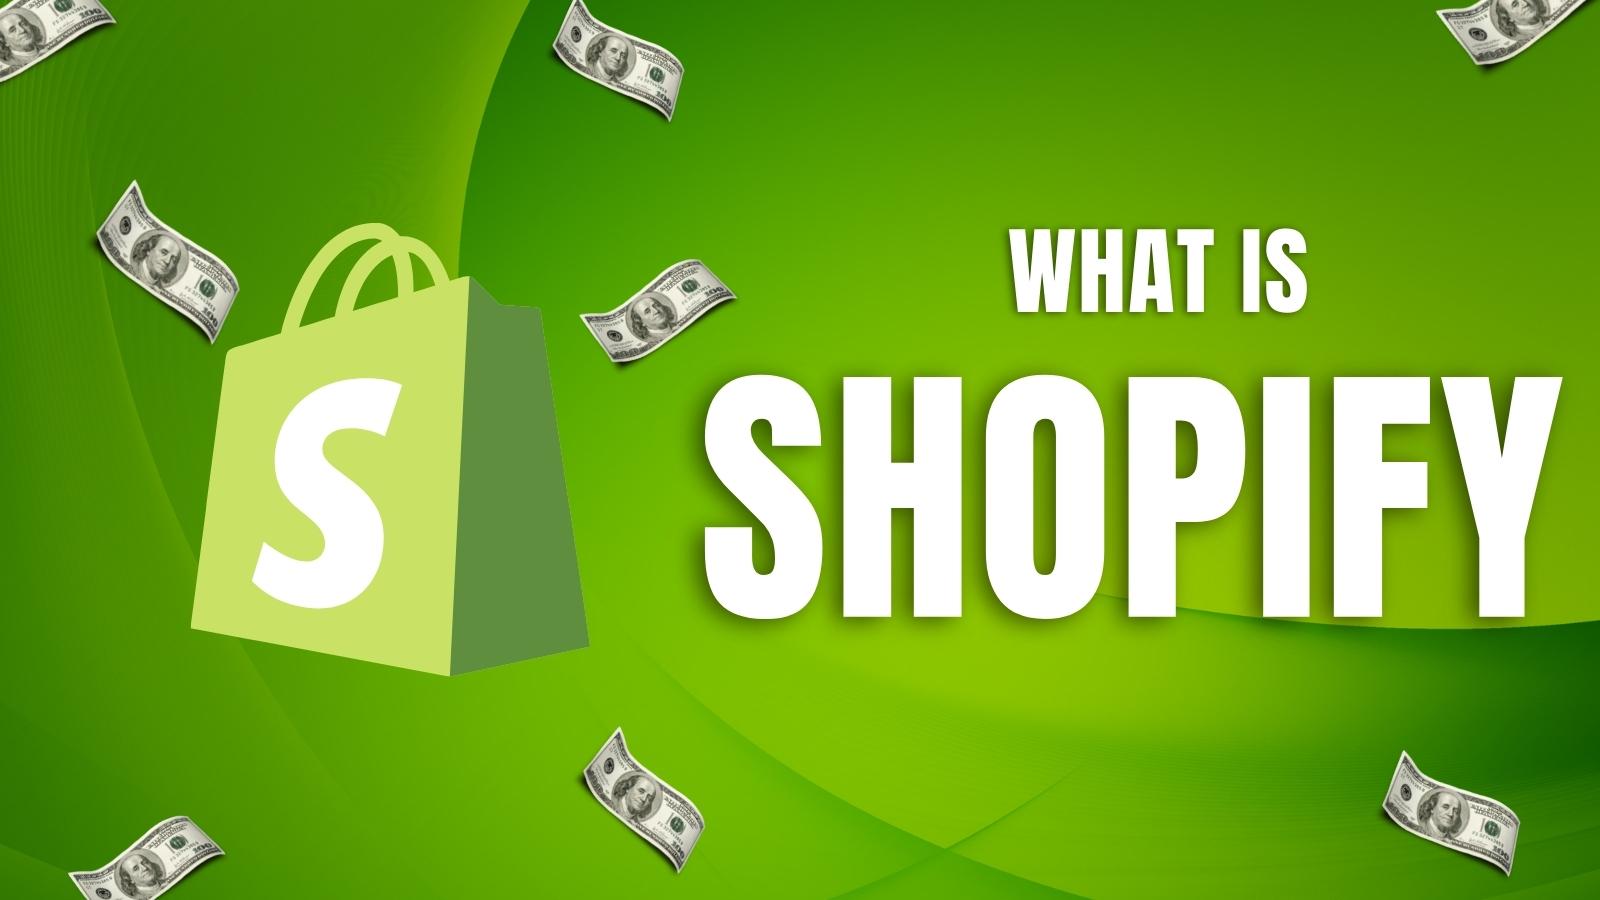 What is shopify